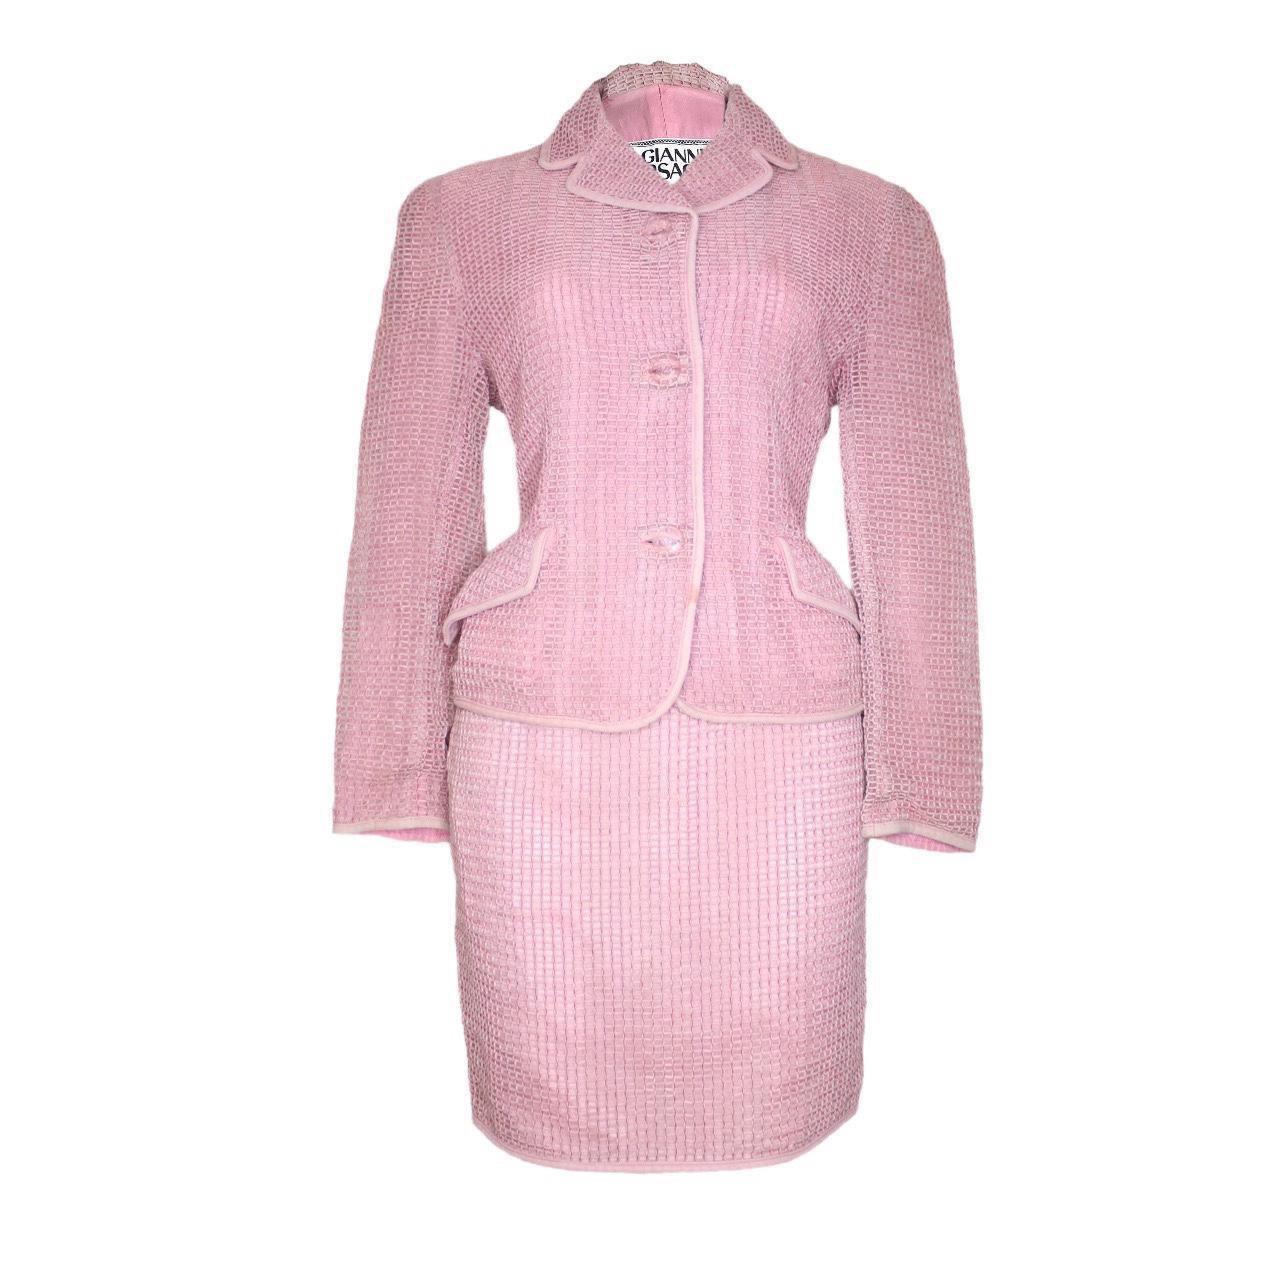 Gianni Versace Suit   Pink Jacket Skirt Set 1990's For Sale 5